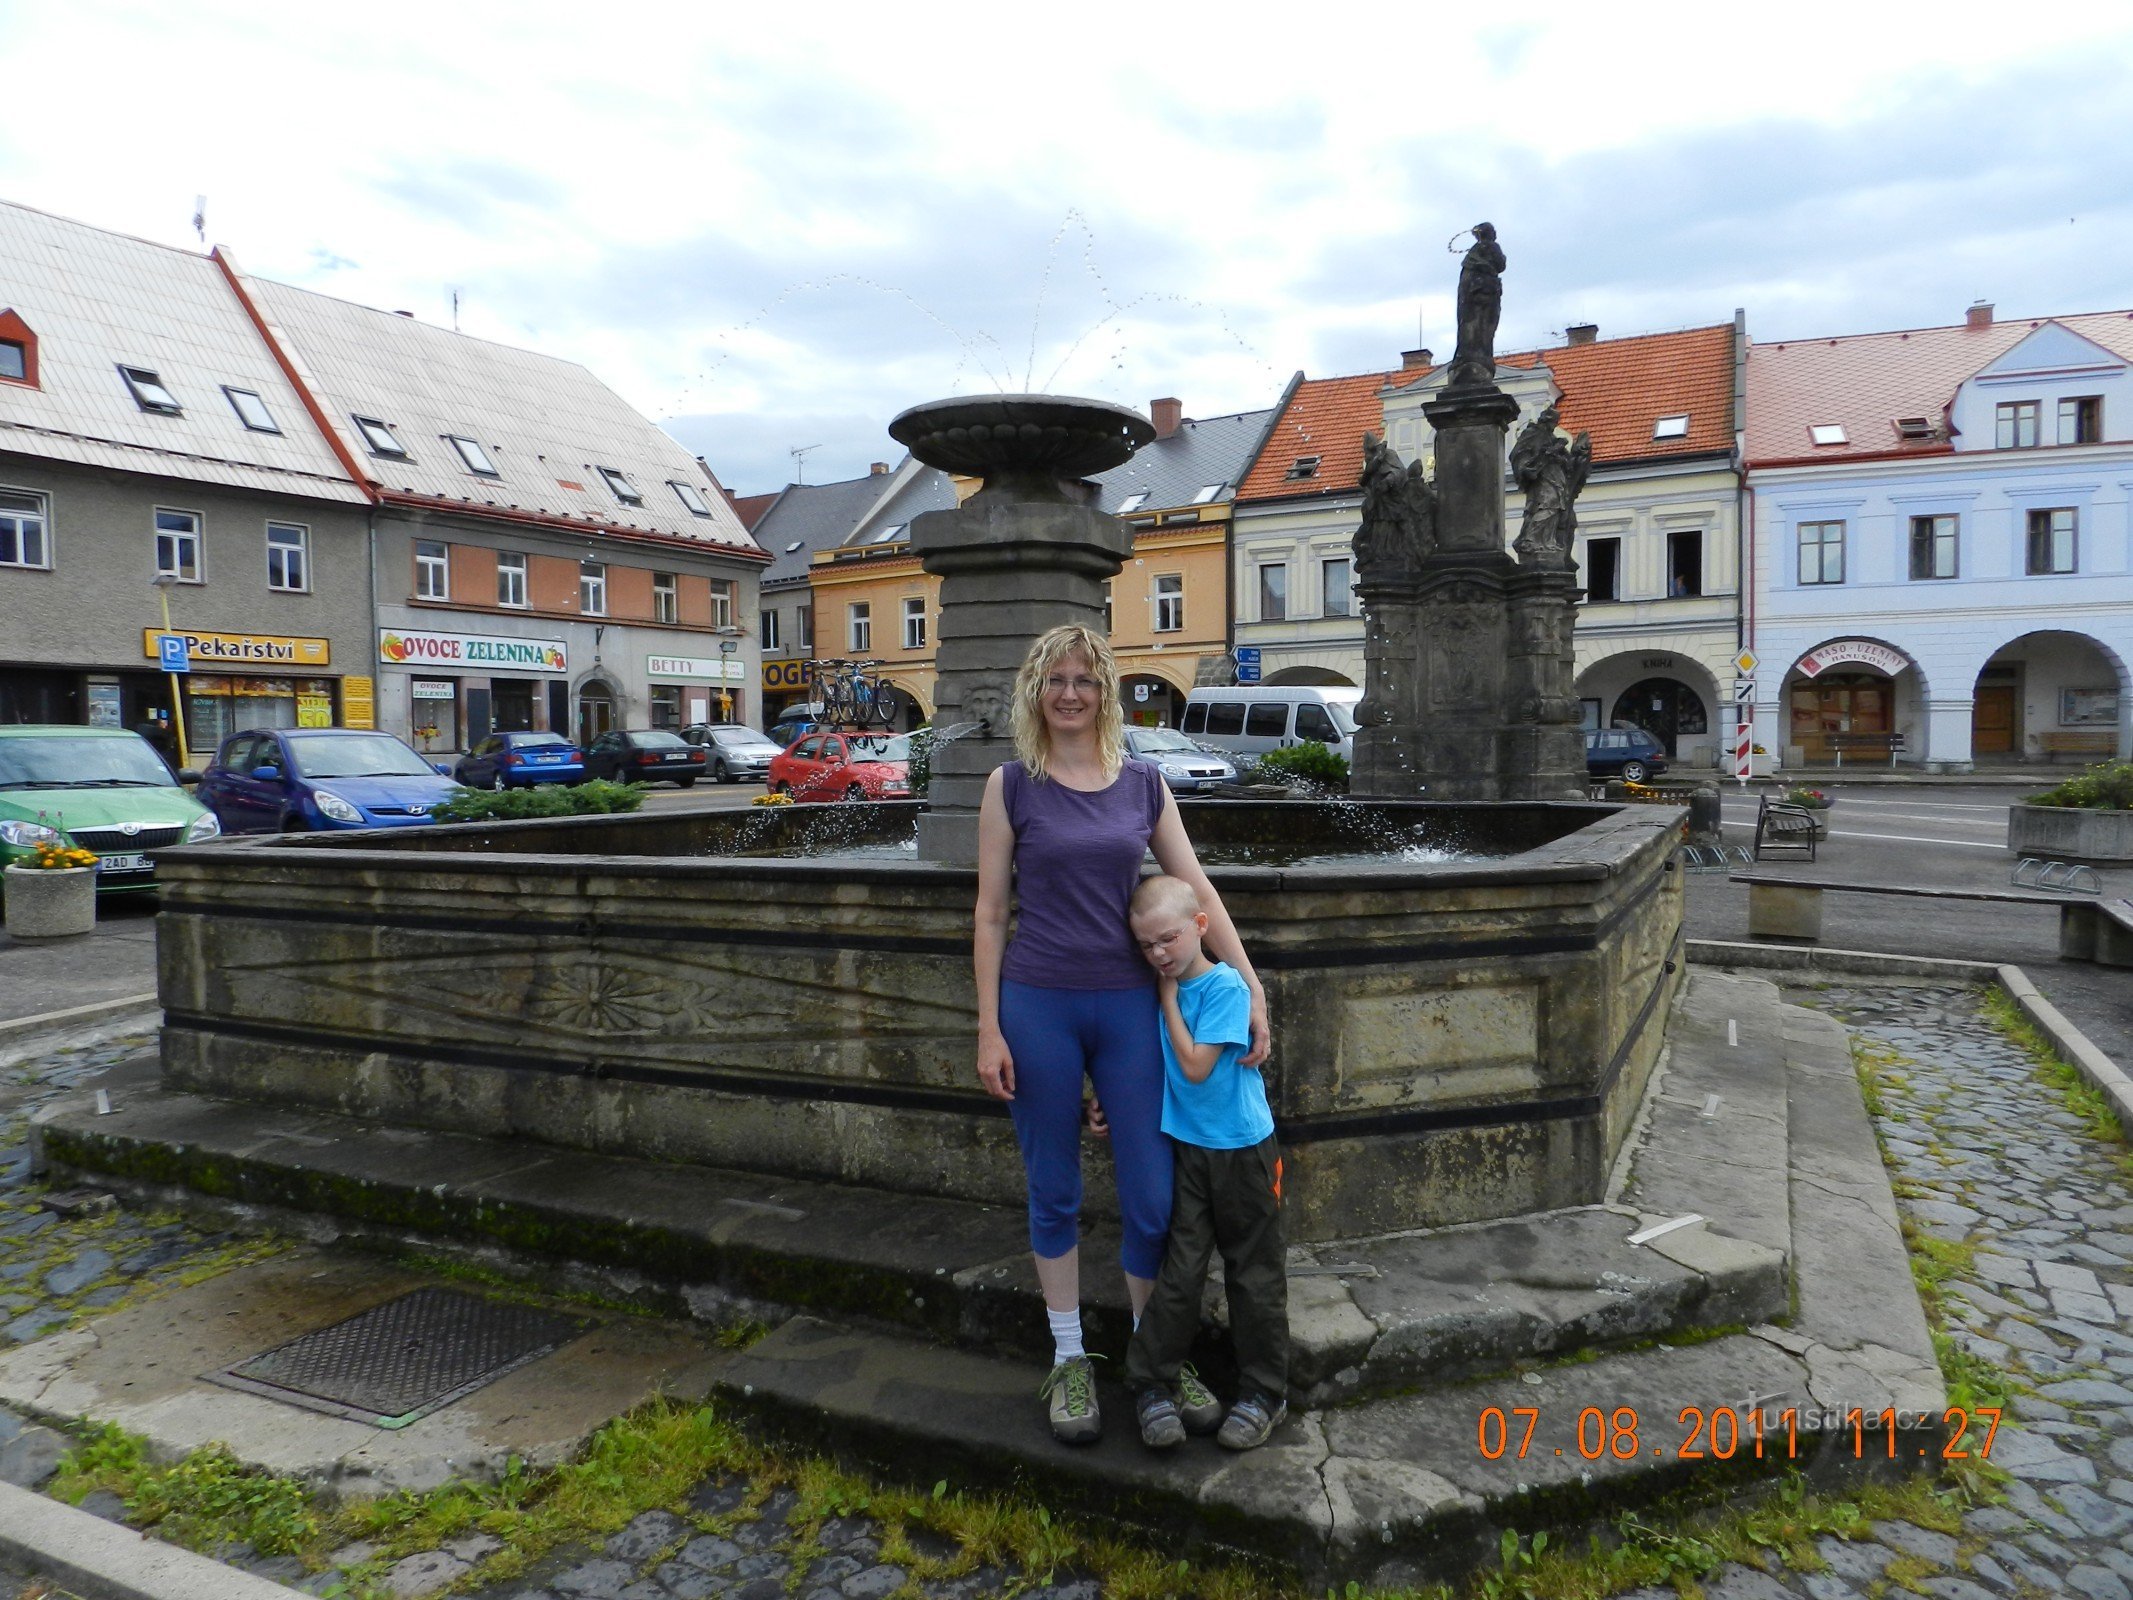 in front of the fountain in Sobotka on the square